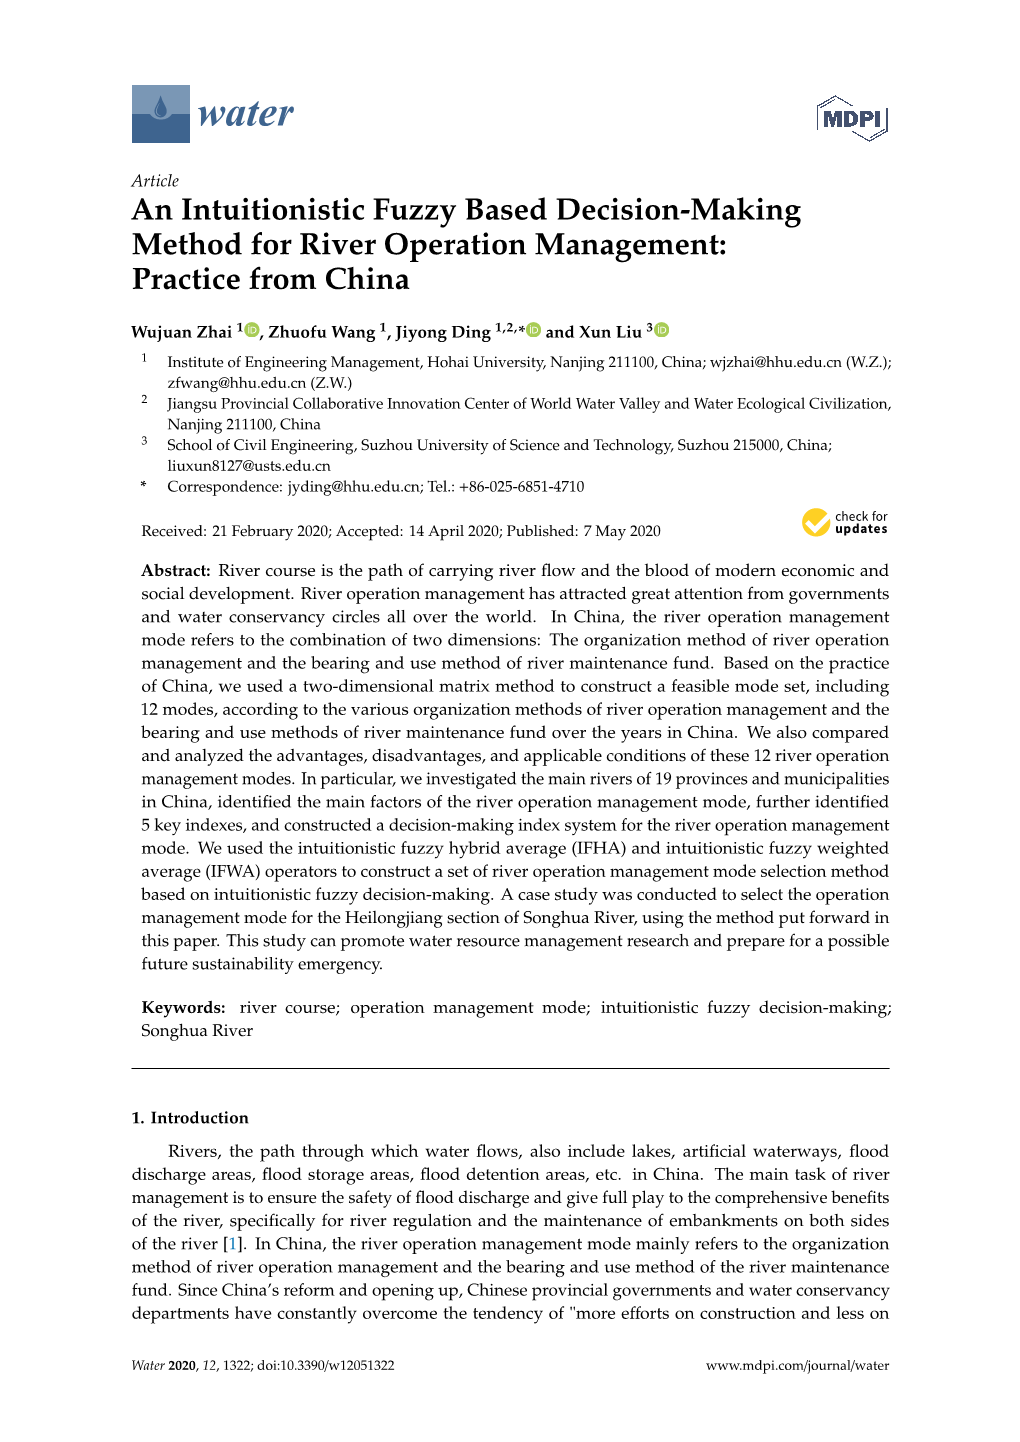 An Intuitionistic Fuzzy Based Decision-Making Method for River Operation Management: Practice from China